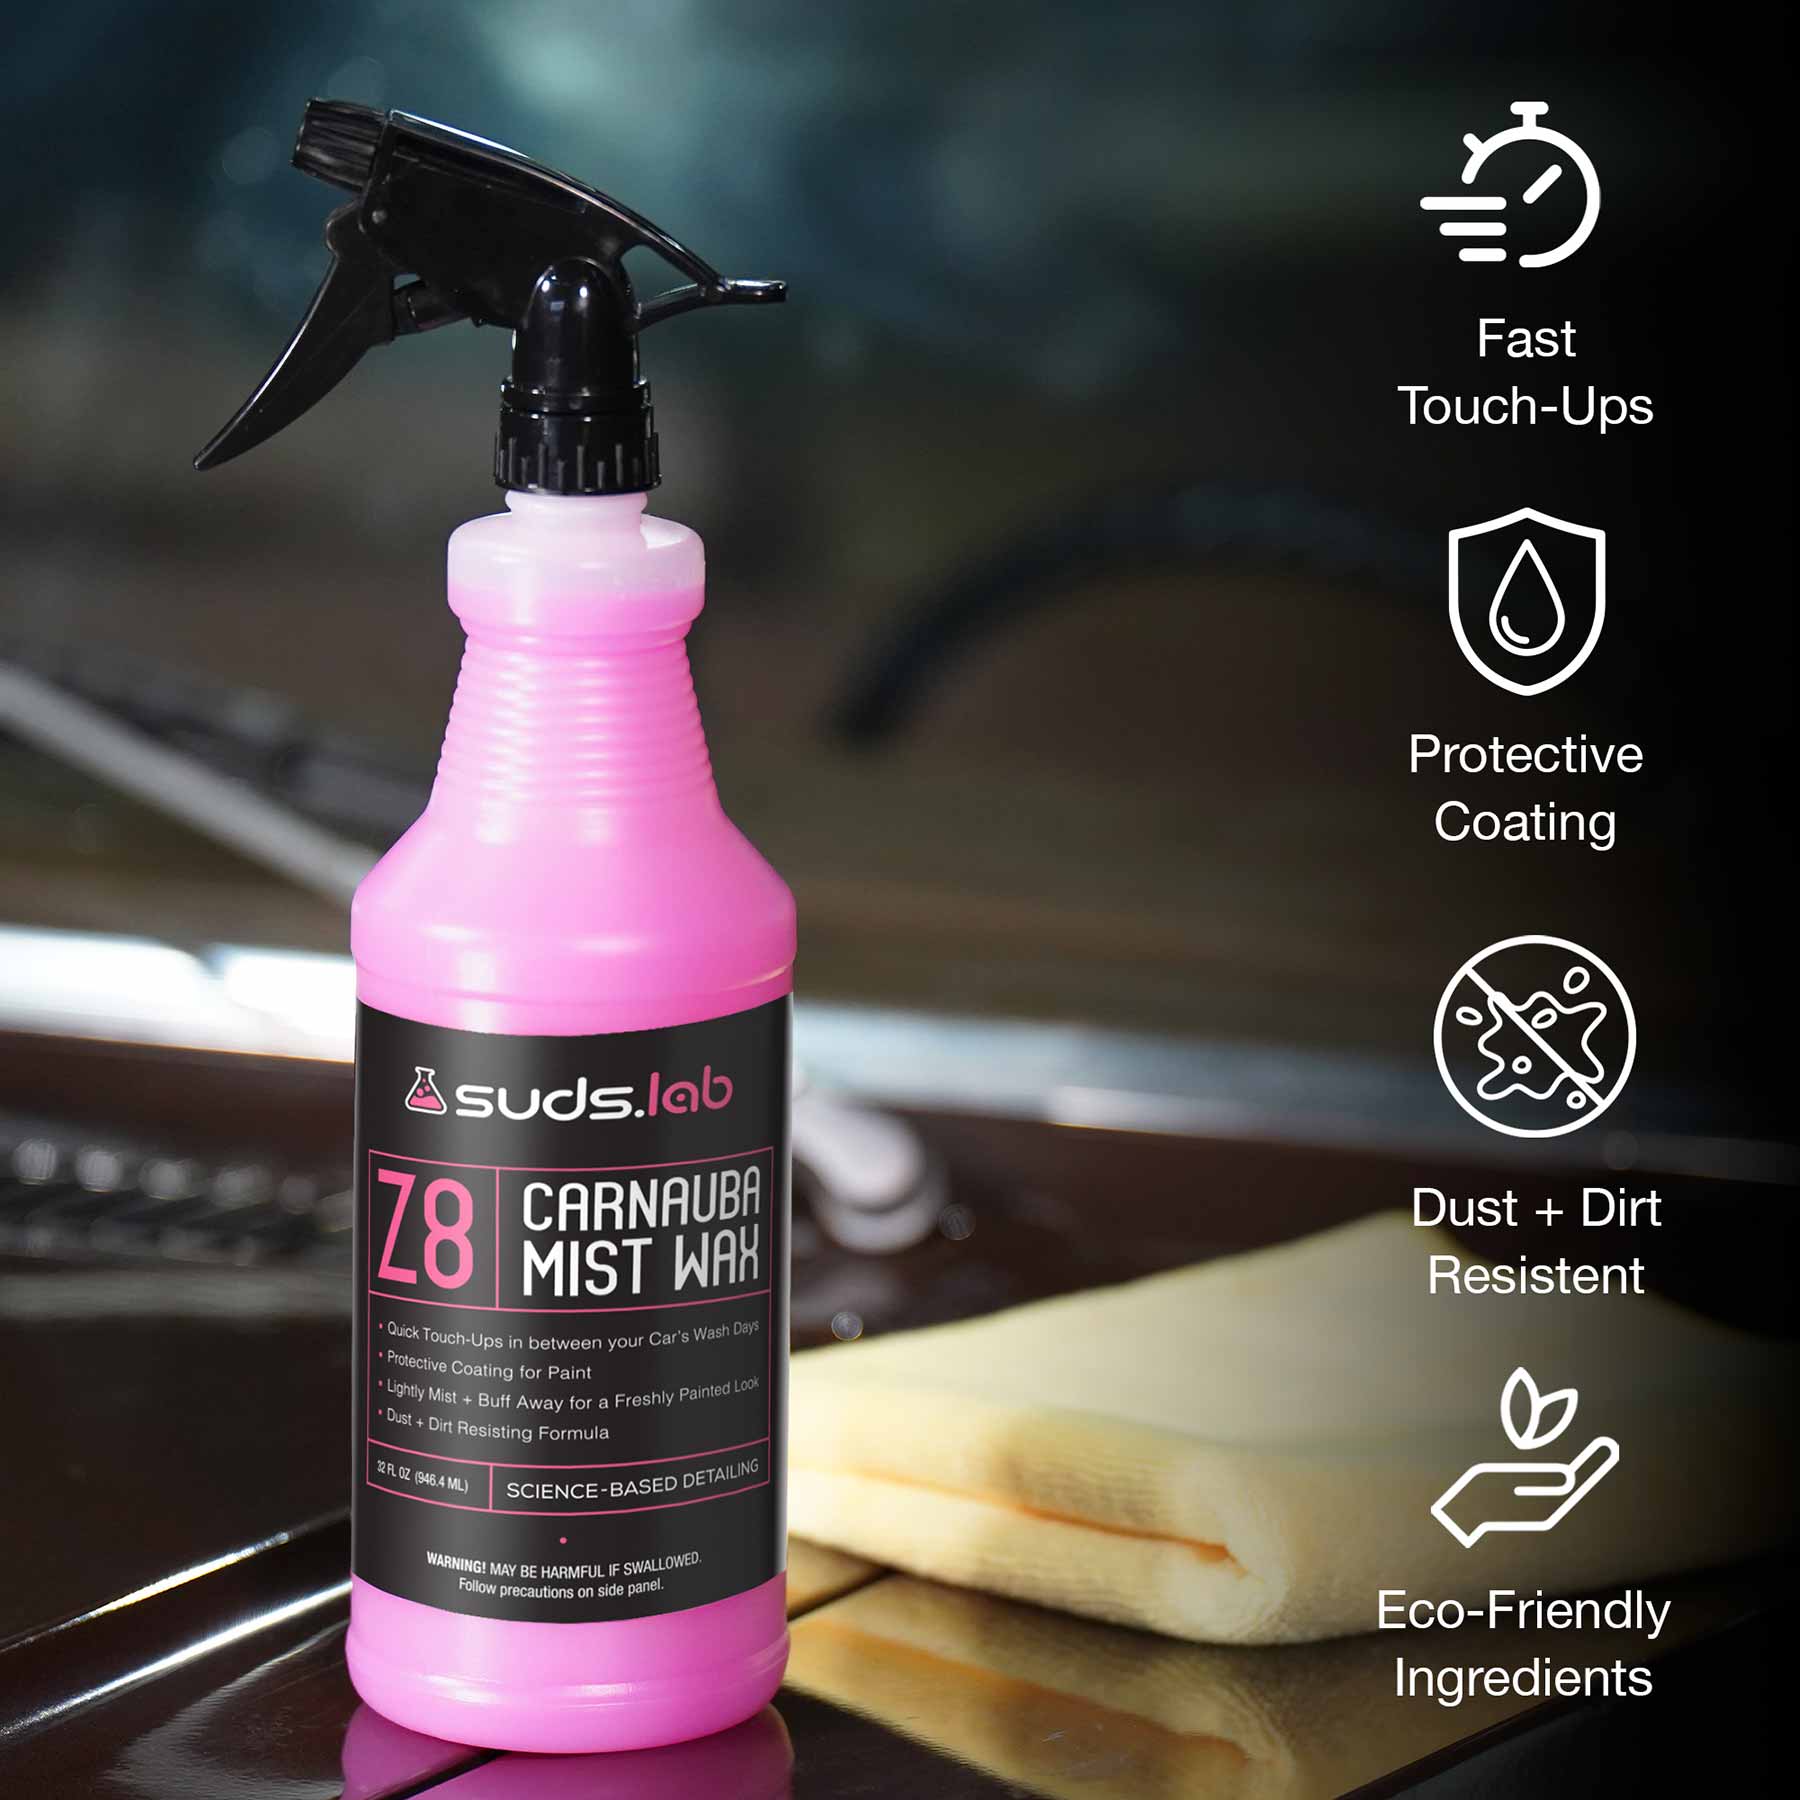 What percentage of Carnauba Wax Spray is used in Epoxy Mold Compound?